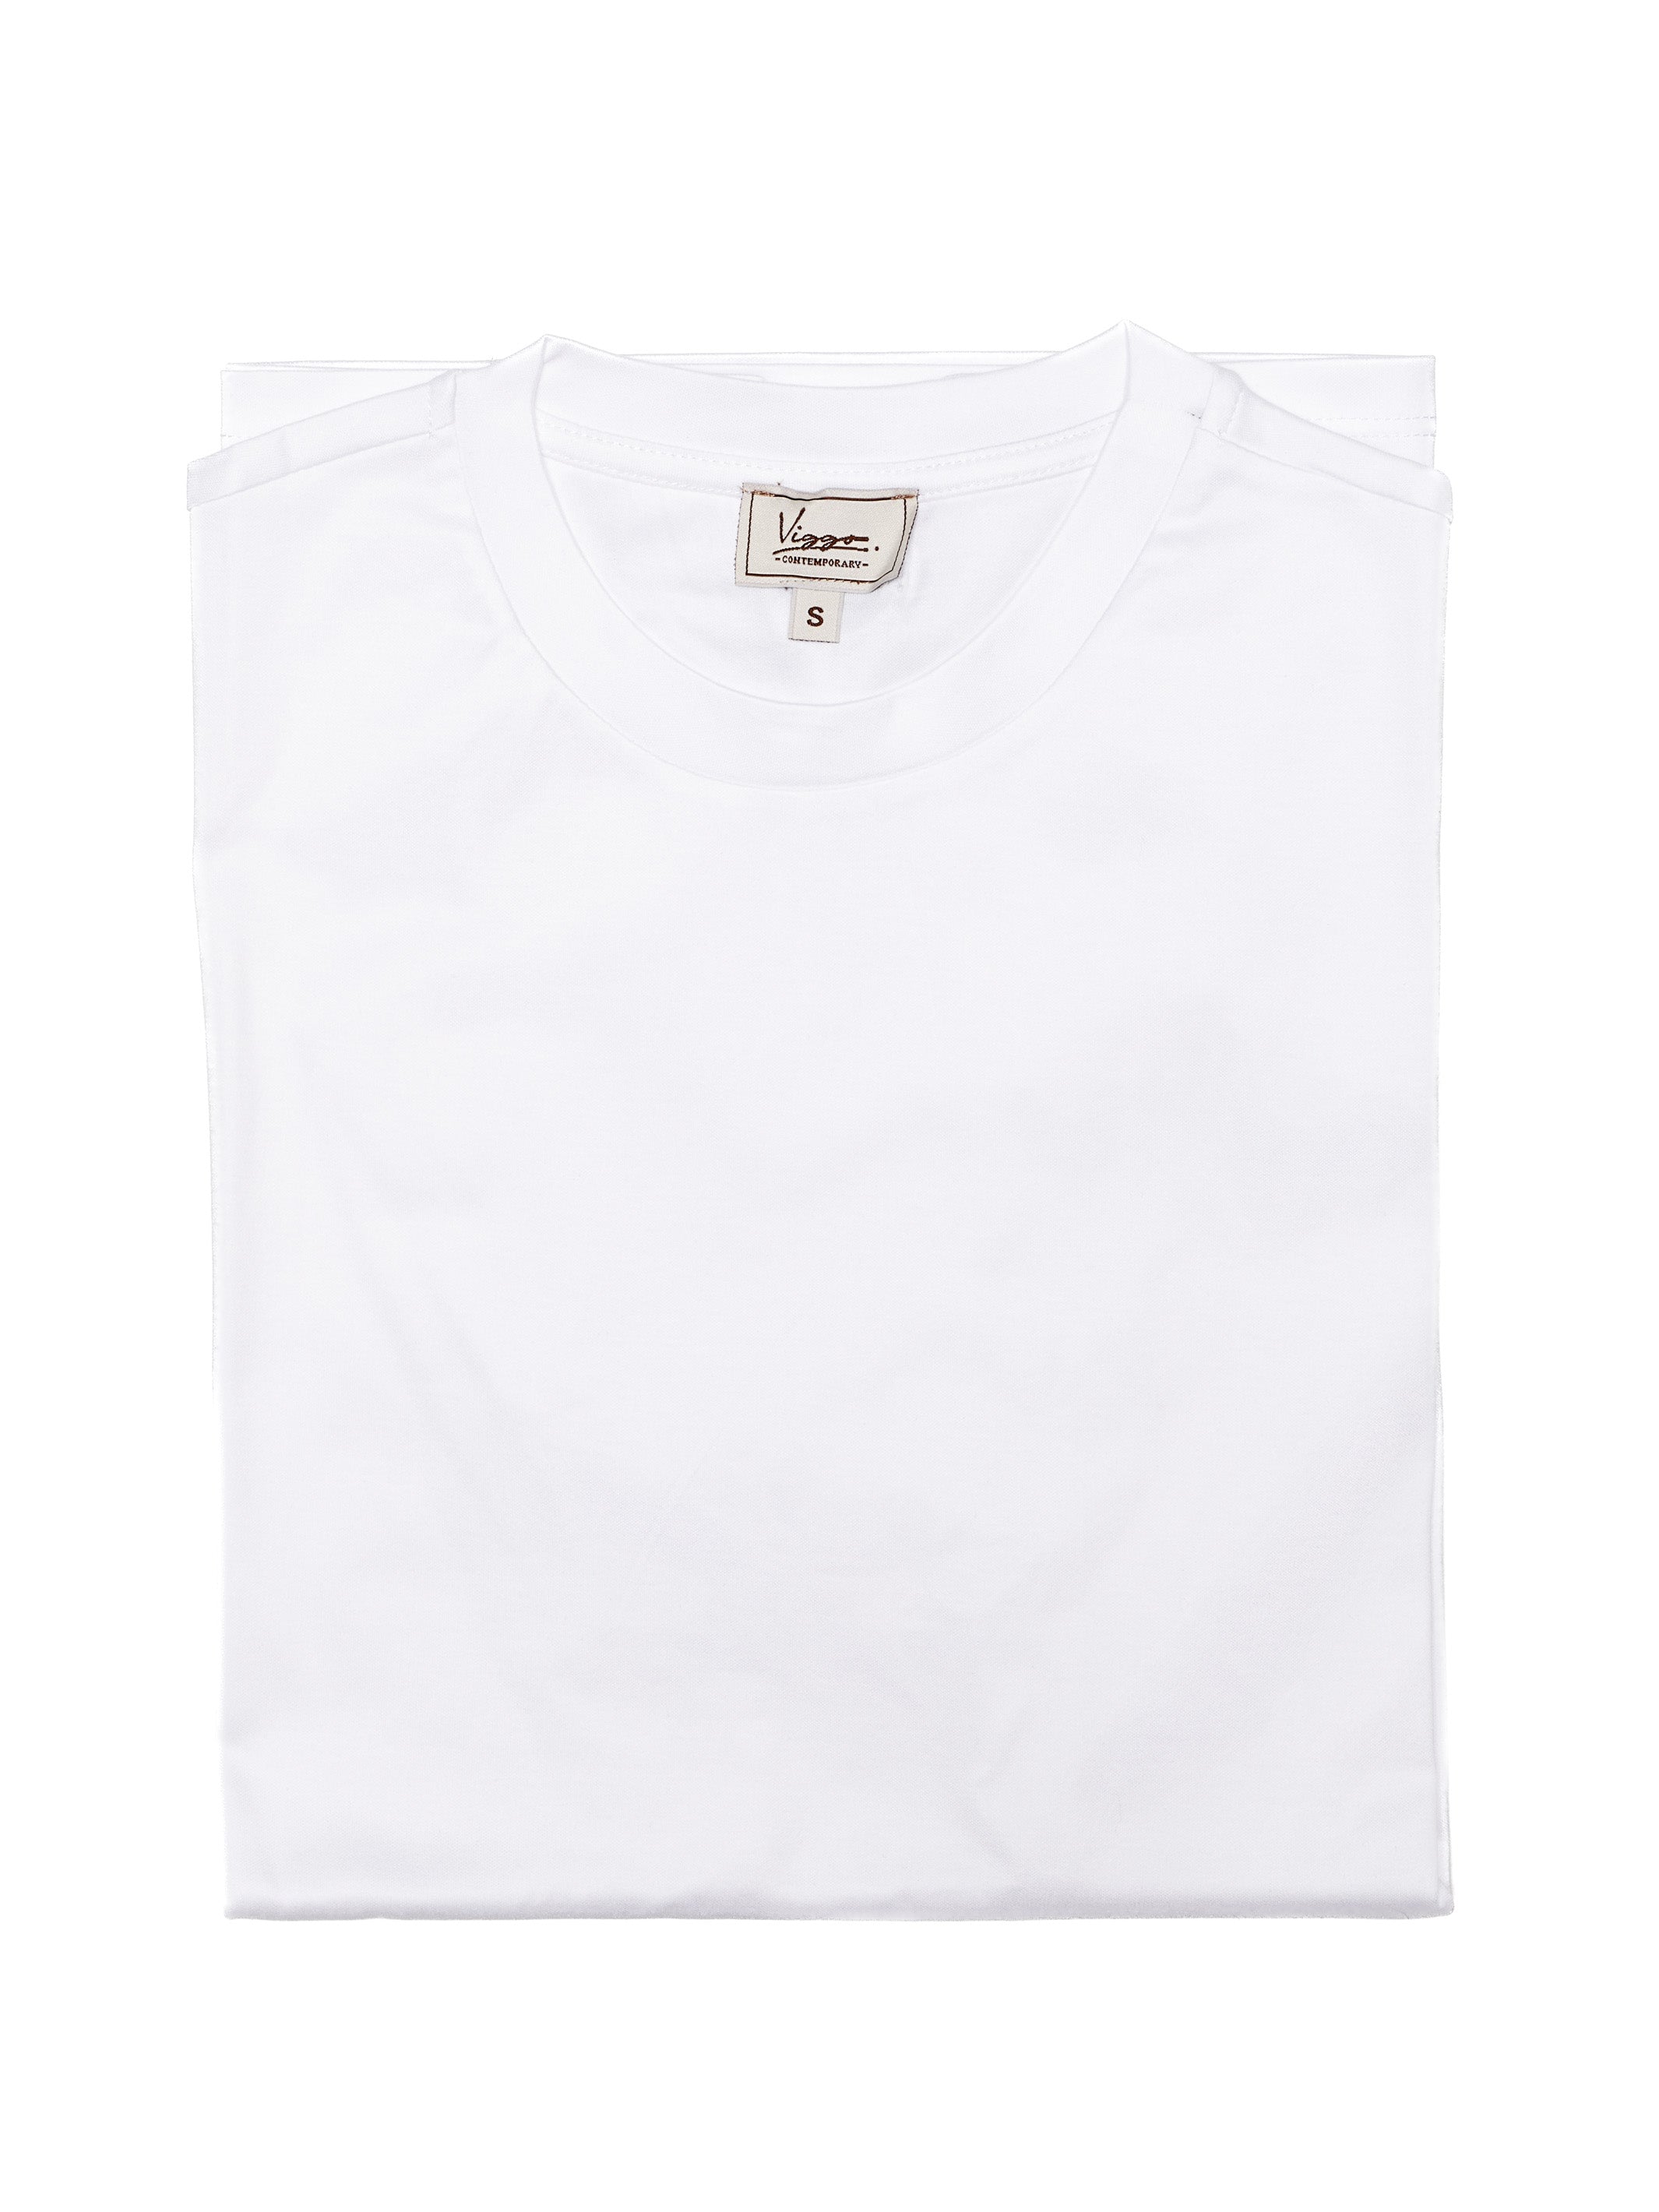 White cotton t-shirt with octagon